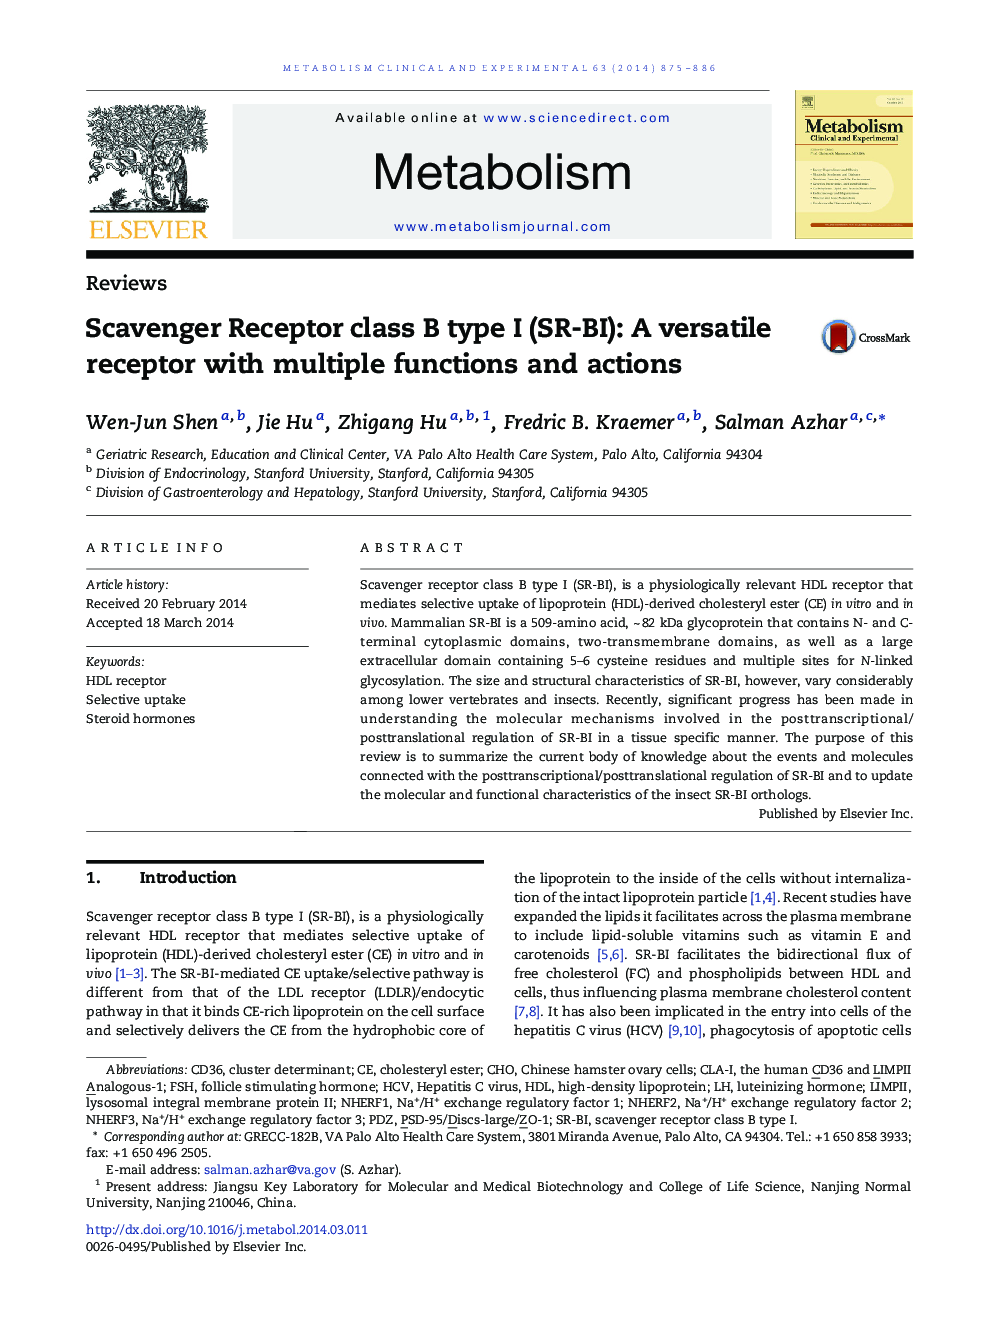 Scavenger Receptor class B type I (SR-BI): A versatile receptor with multiple functions and actions